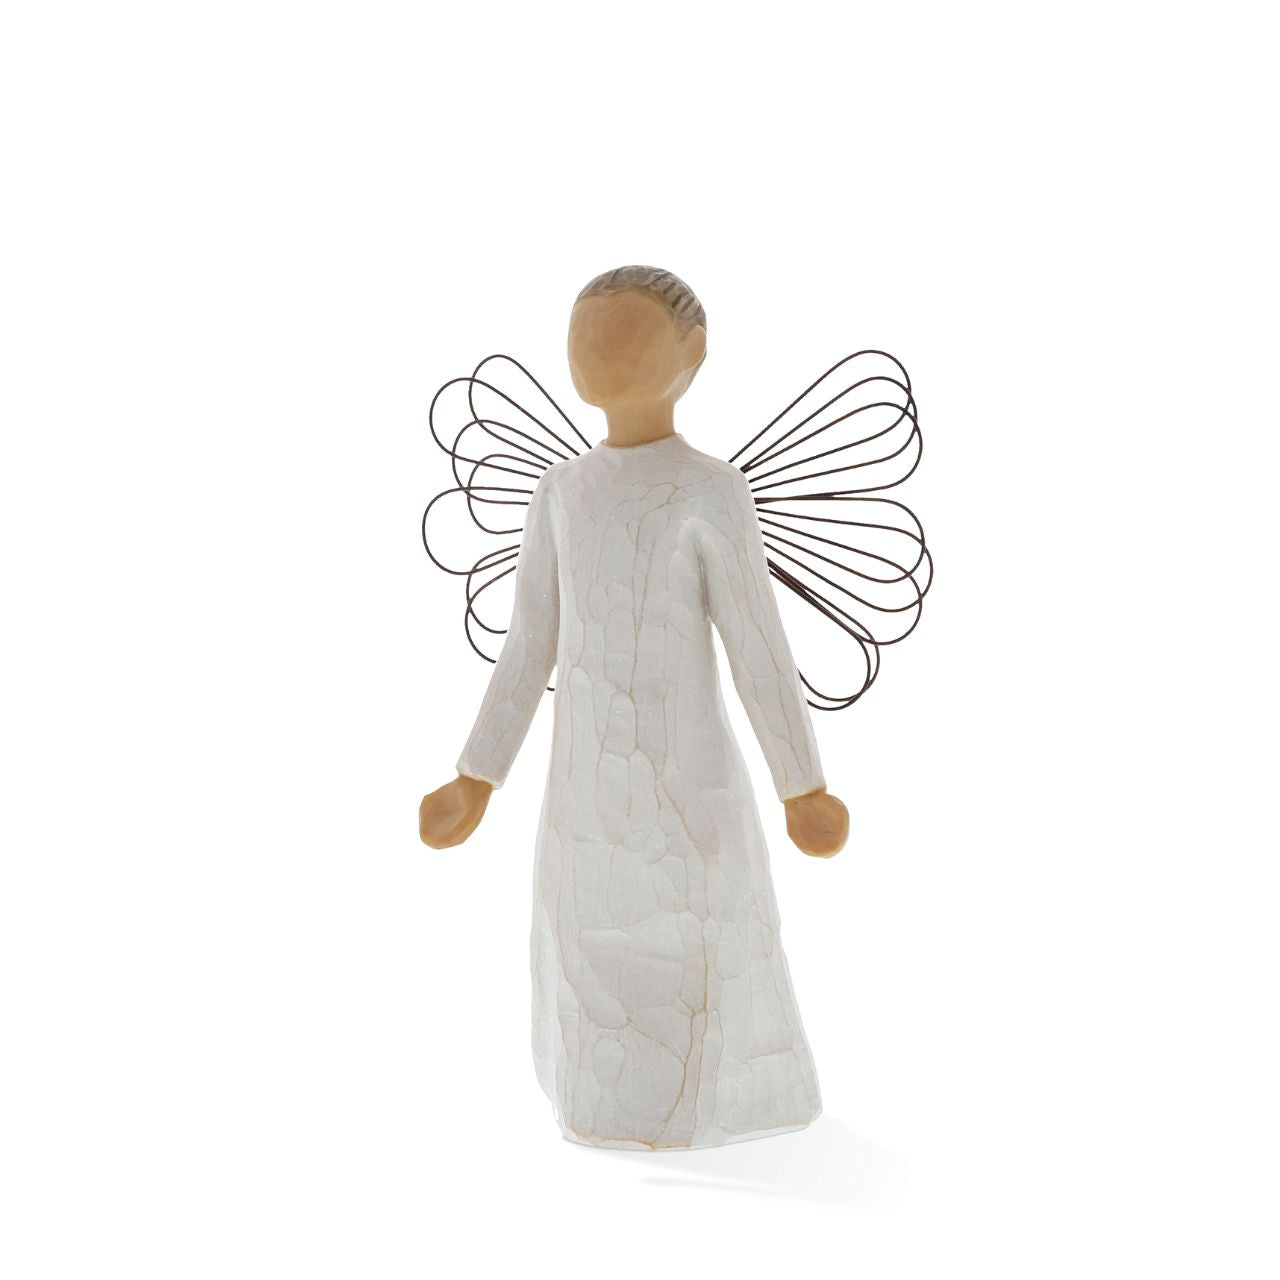 Shop Willow Tree, Figurines, Ornaments & More